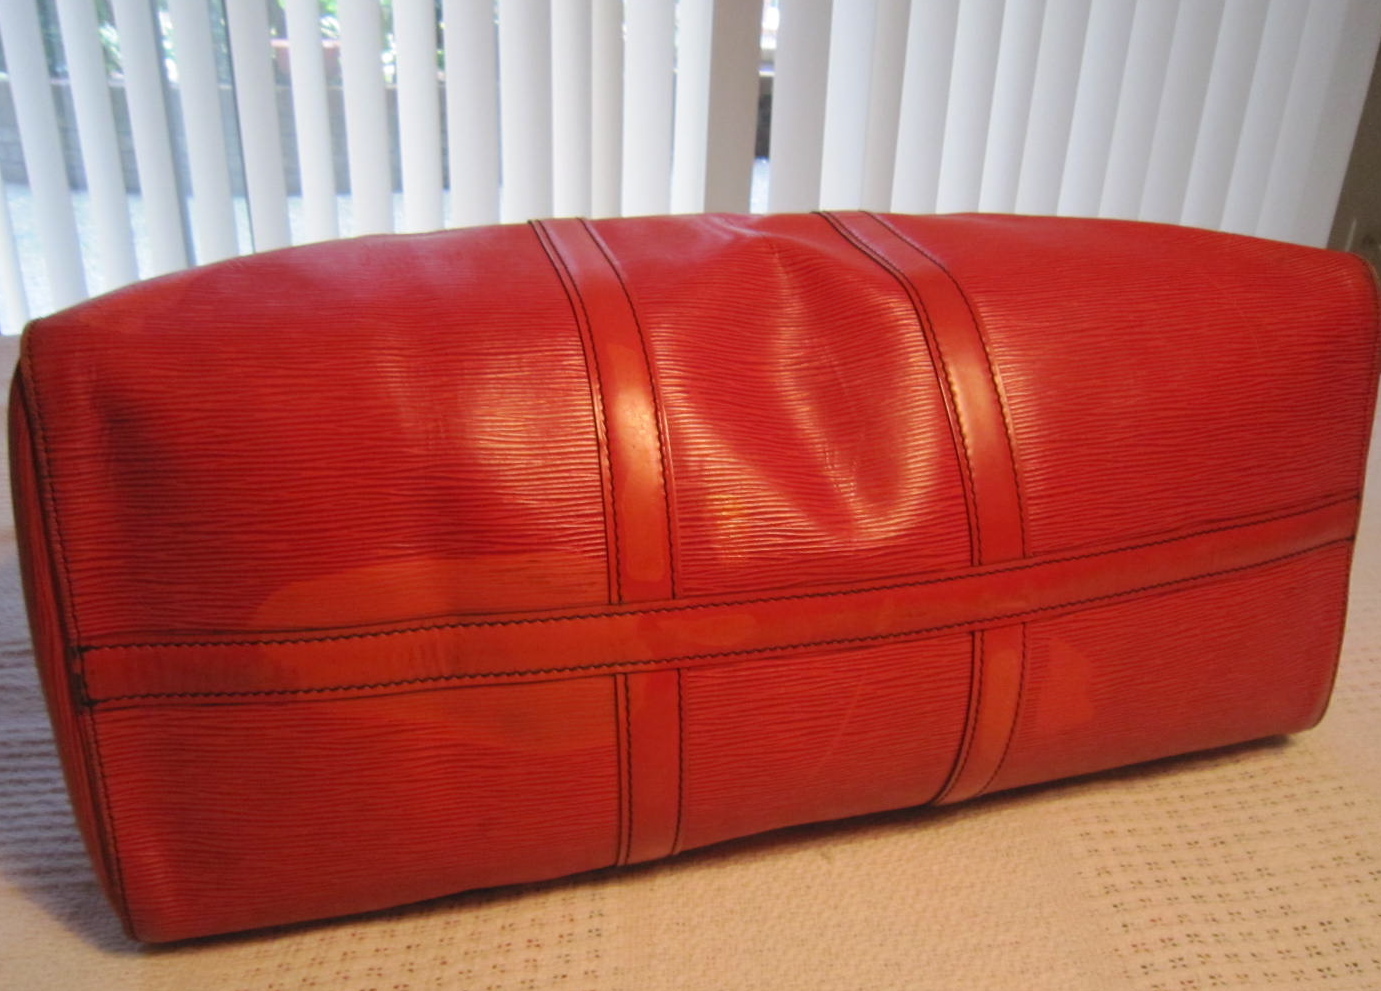 Louis Vuitton Red EPI Leather Keepall 50 Duffle Bag 89lk328s